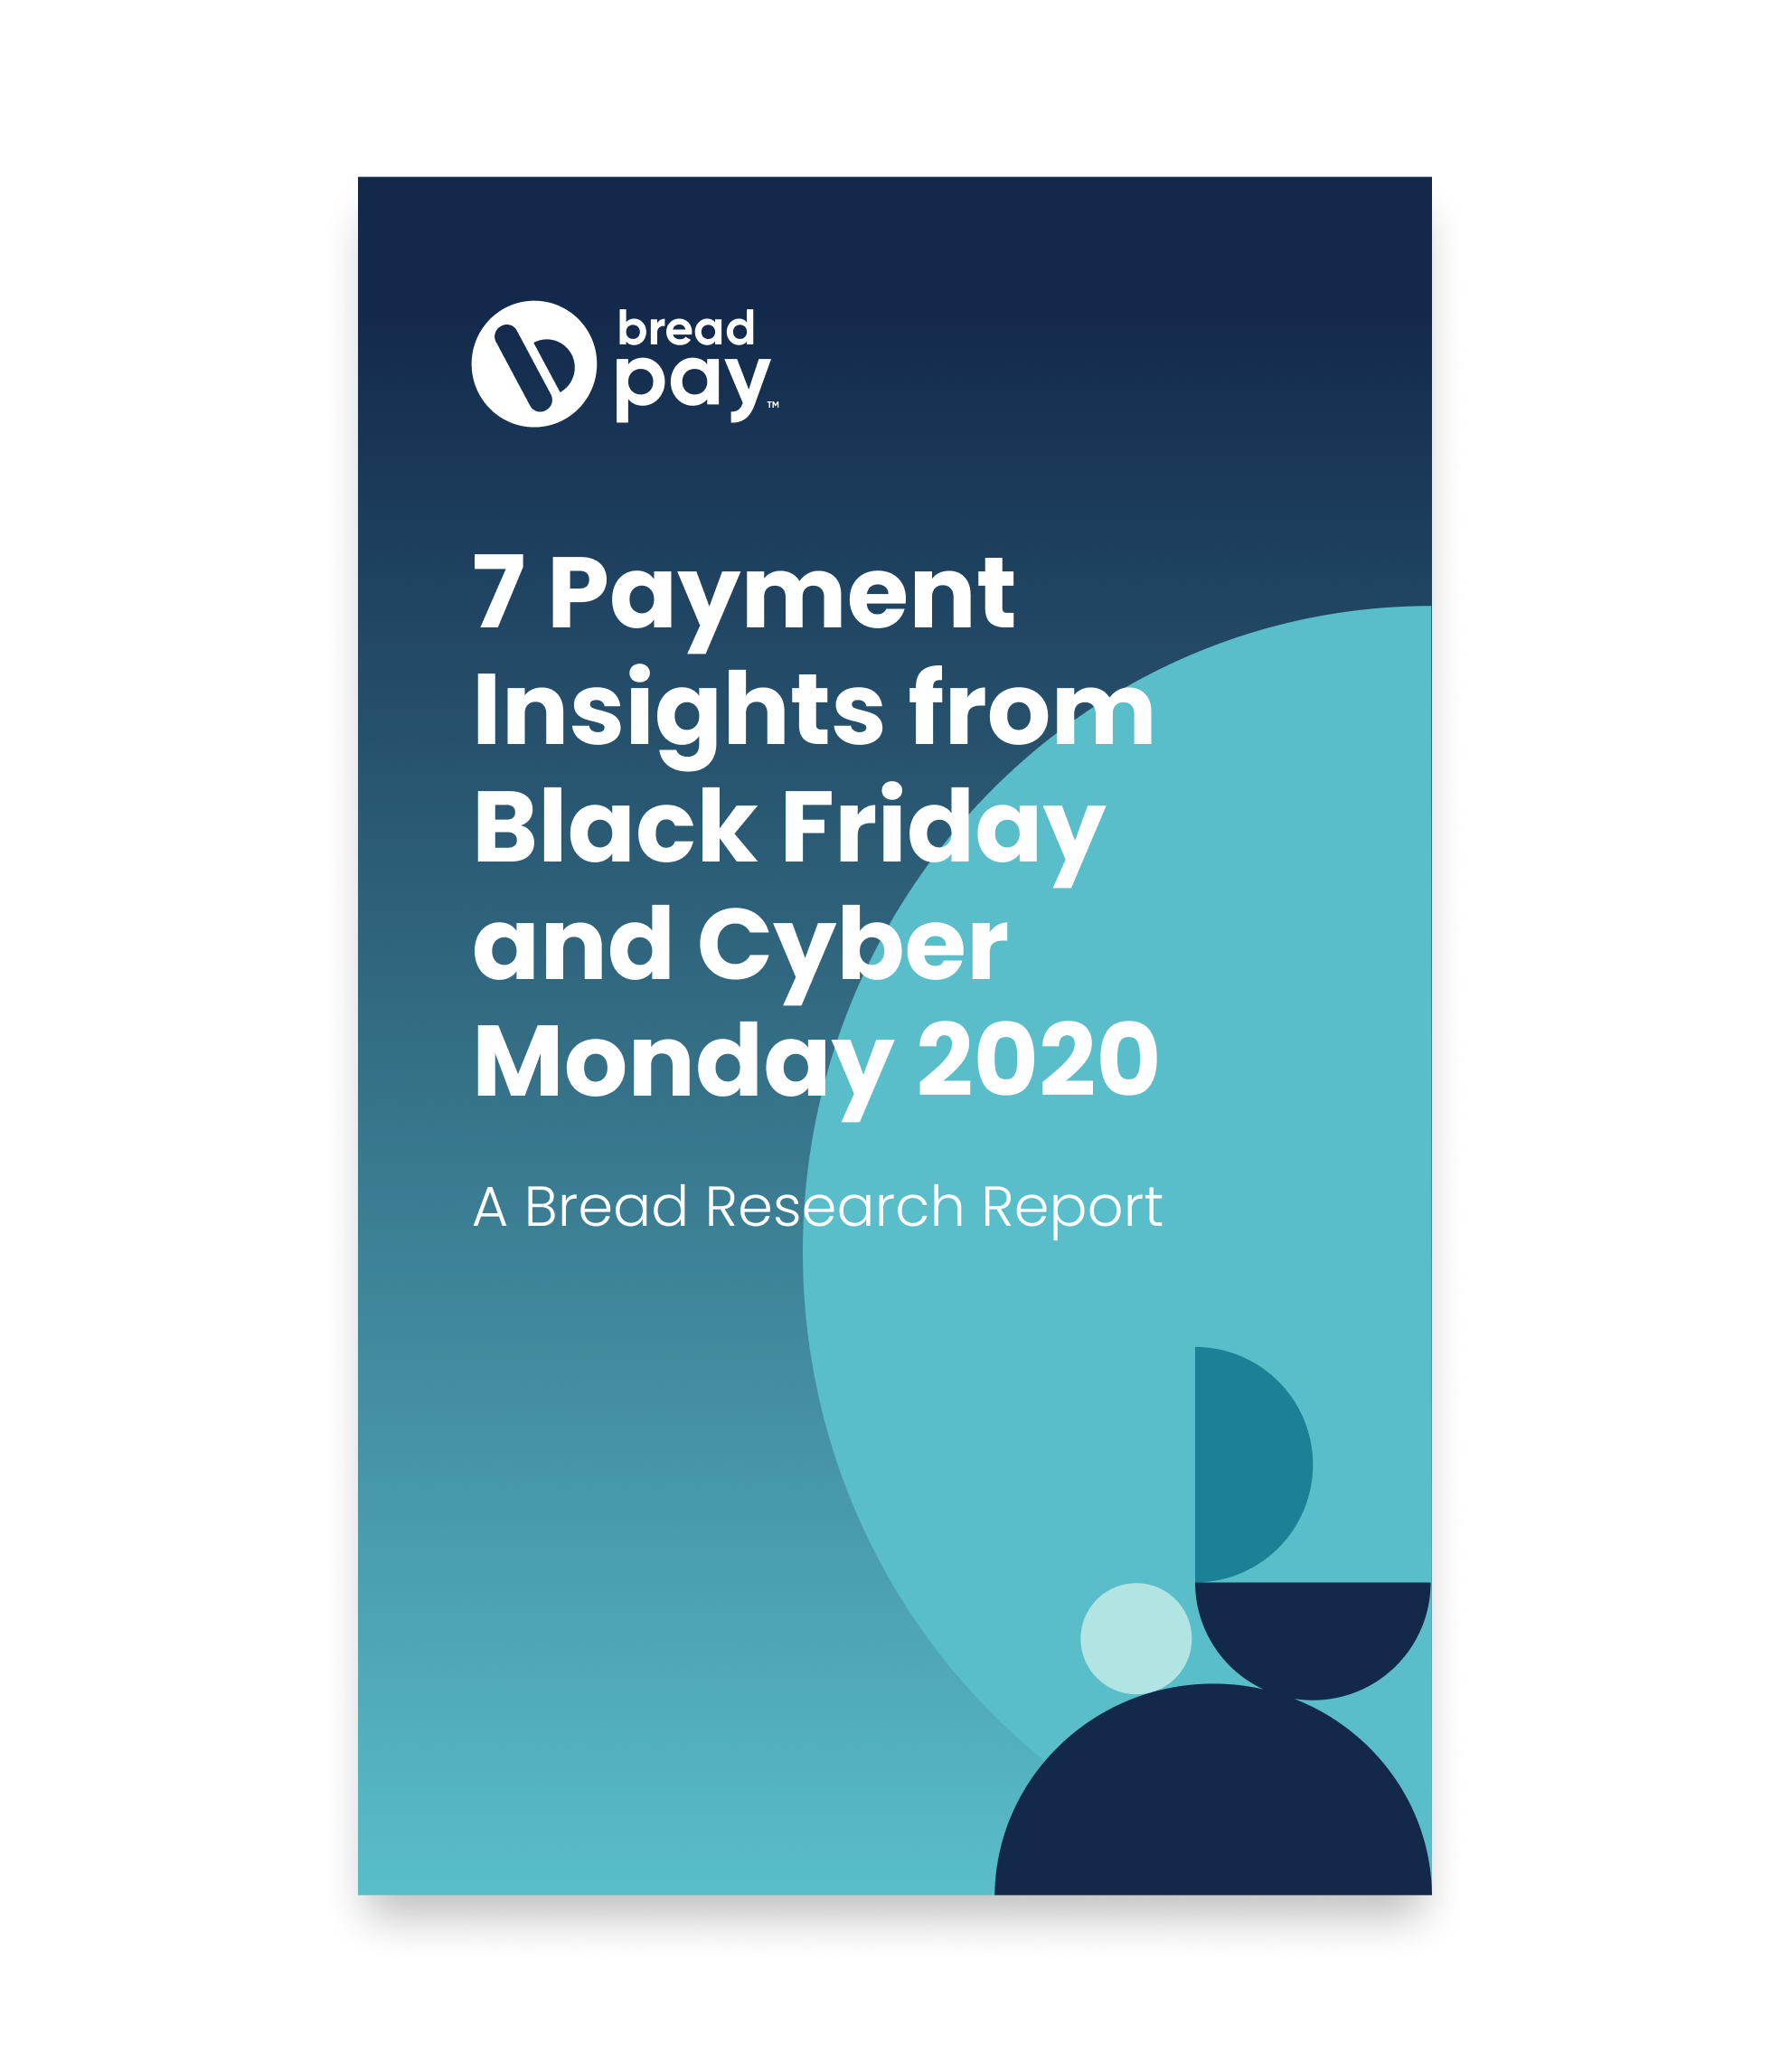 7 Payment Insights from Black Friday and Cyber Monday 2020